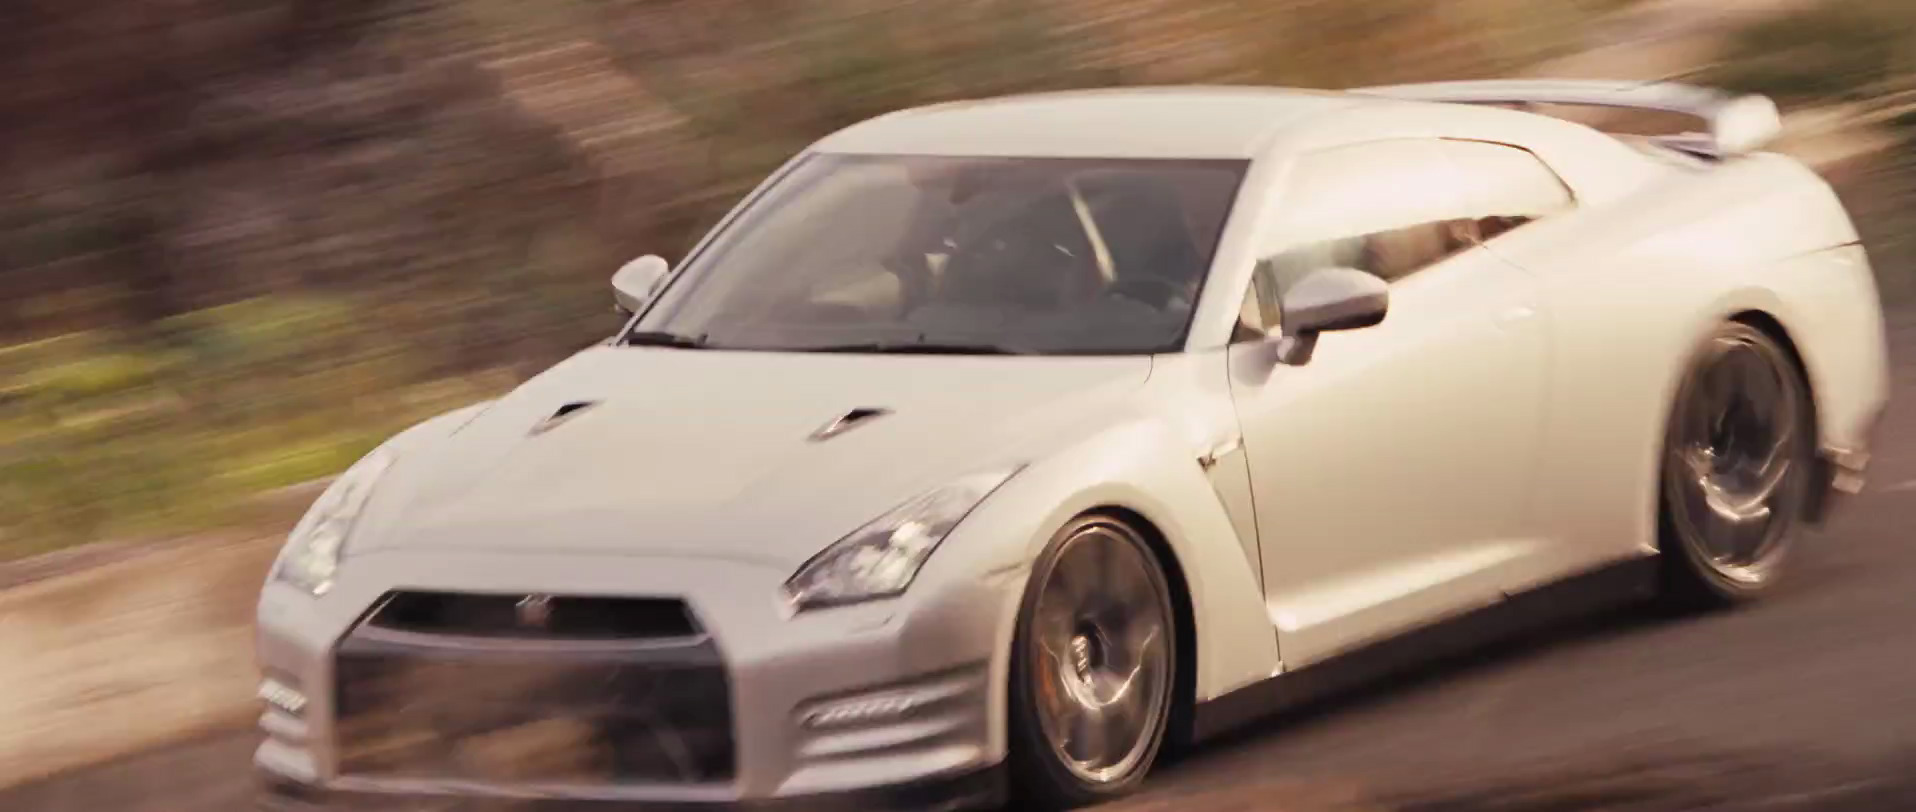 nissan gtr fast and furious 6